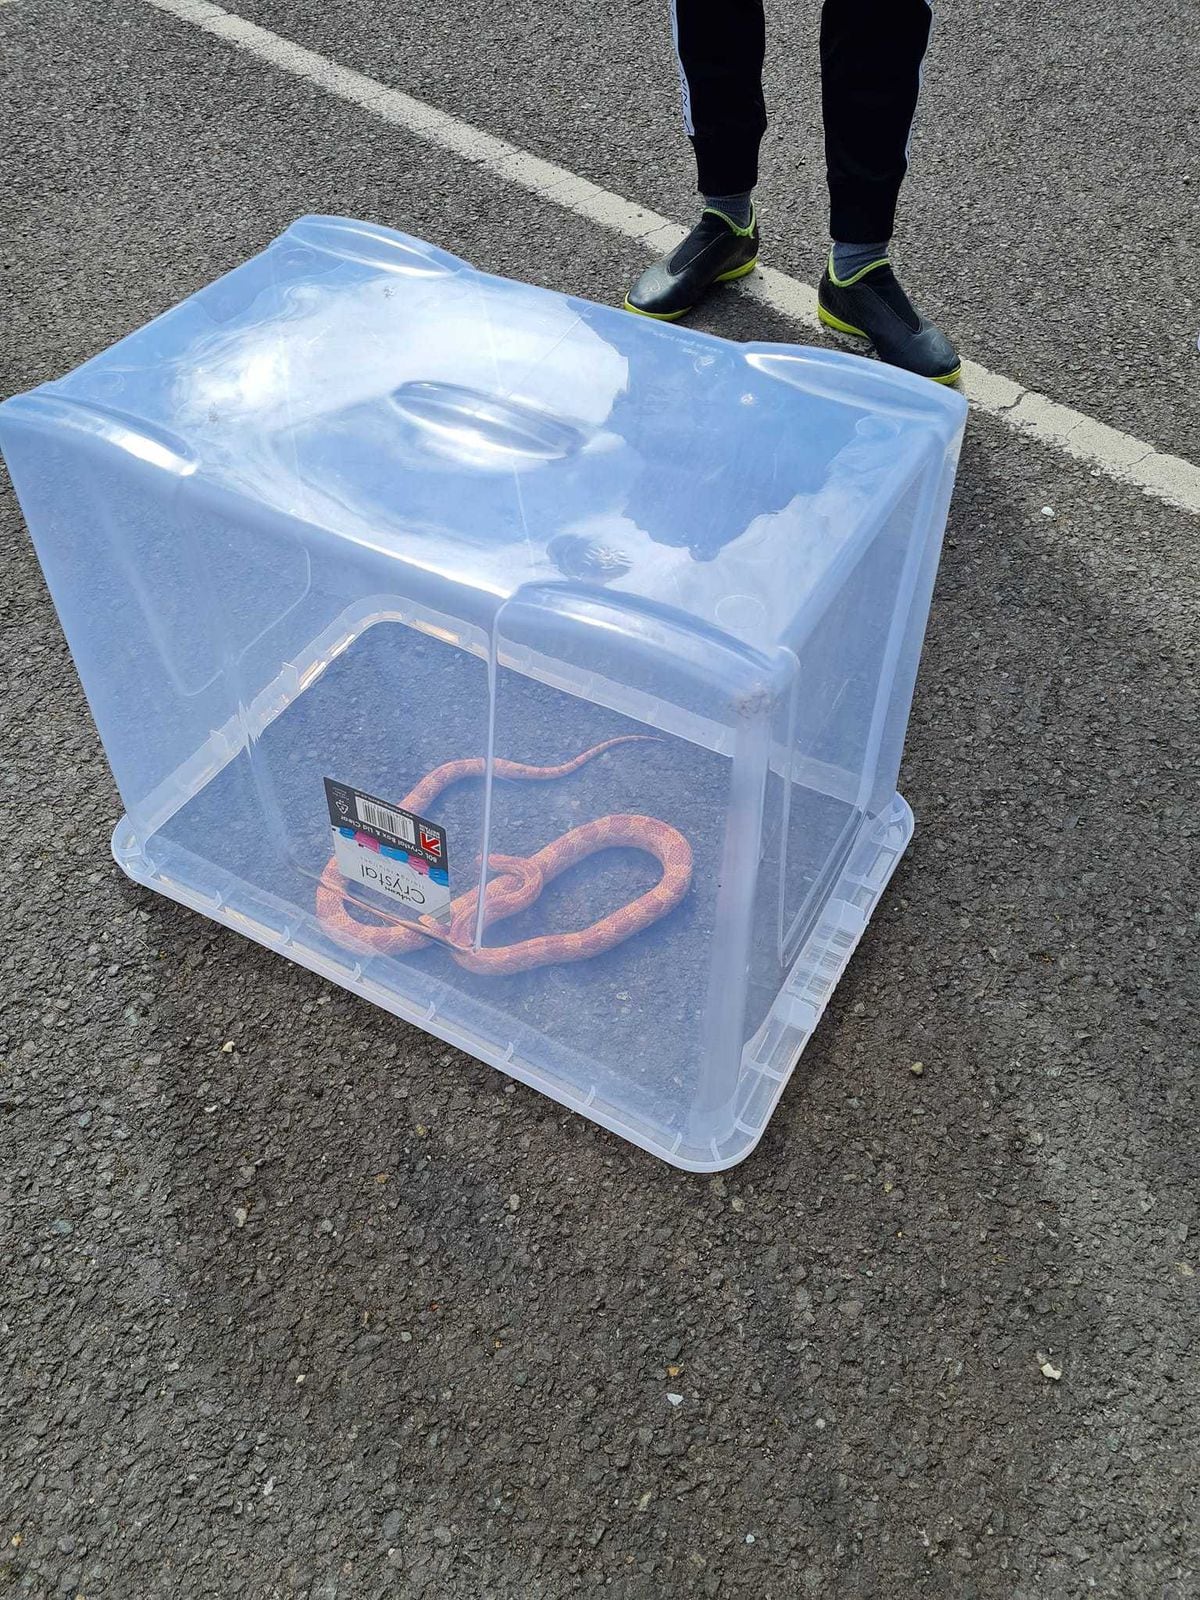 The snake safe in the box